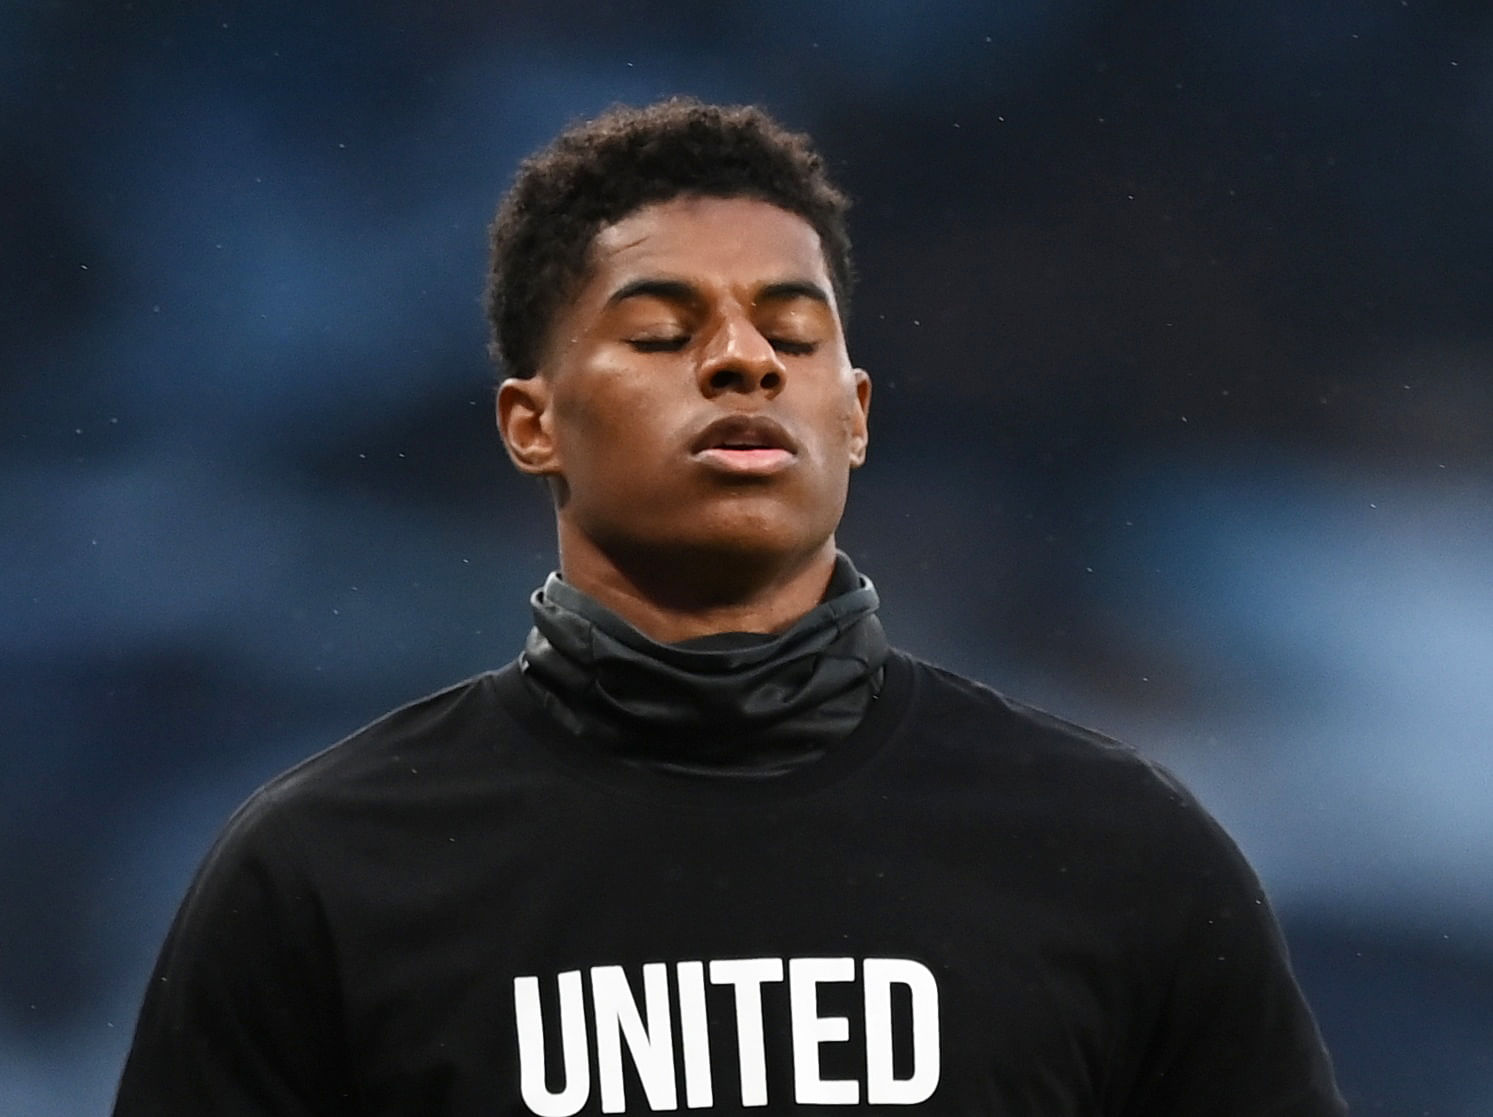 Manchester United's Marcus Rashford with a message against racism during the warm up before the match, as play resumes behind closed doors following the outbreak of the coronavirus disease (COVID-19). Credits: Reuters Photo